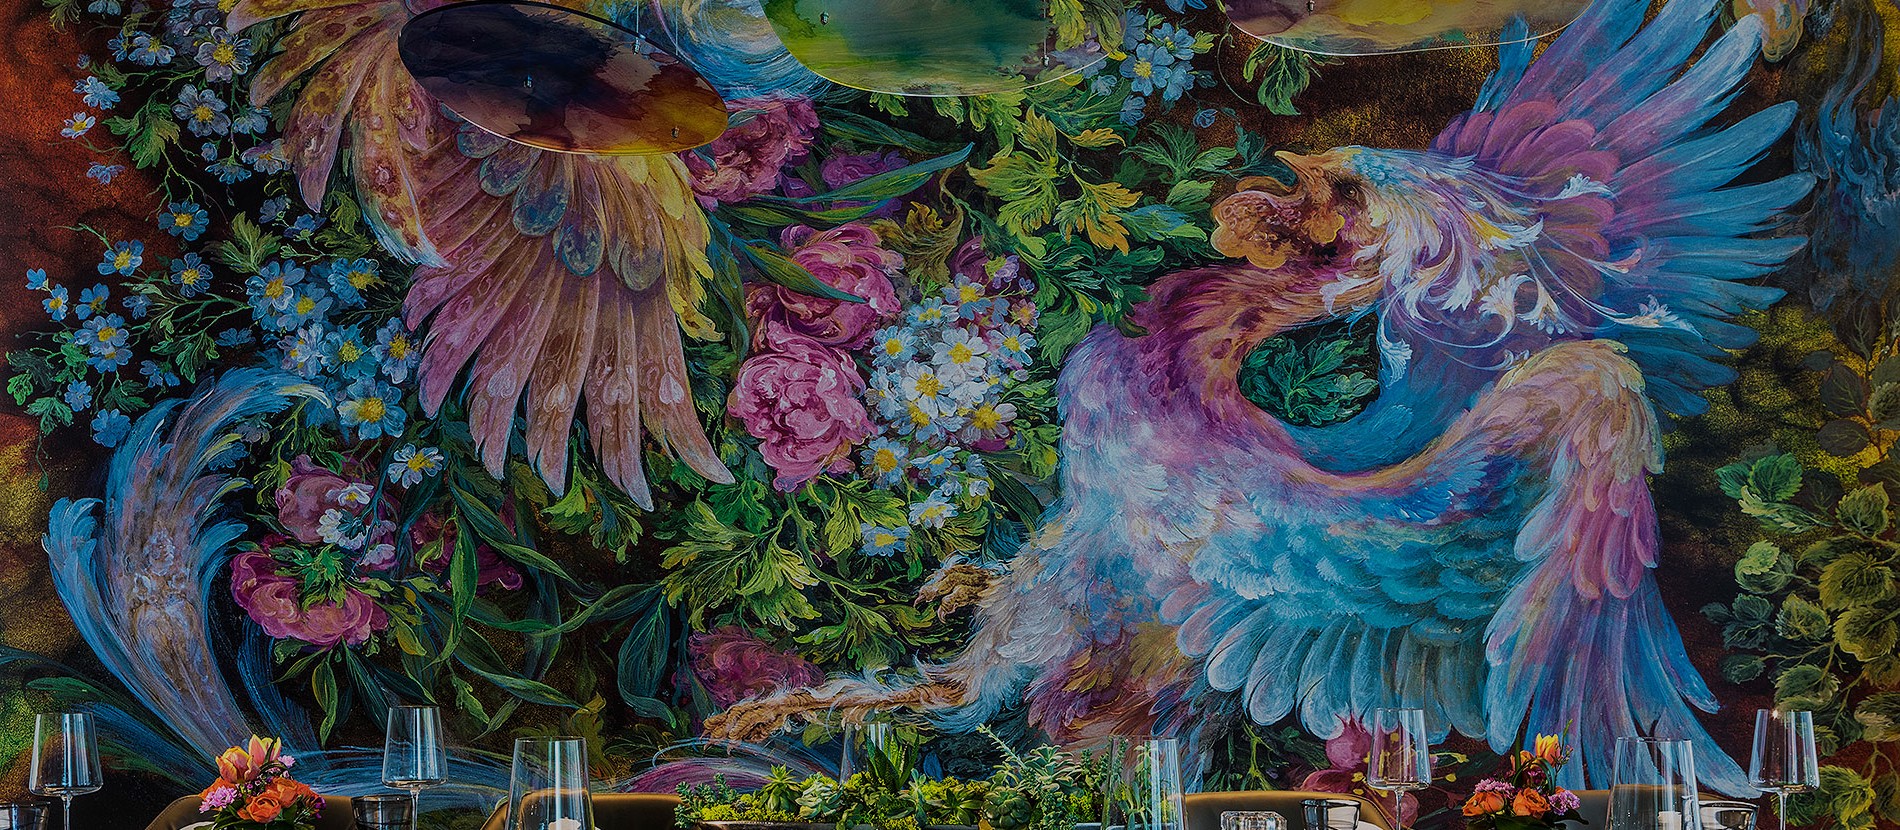 Large colorful mural next to dining table